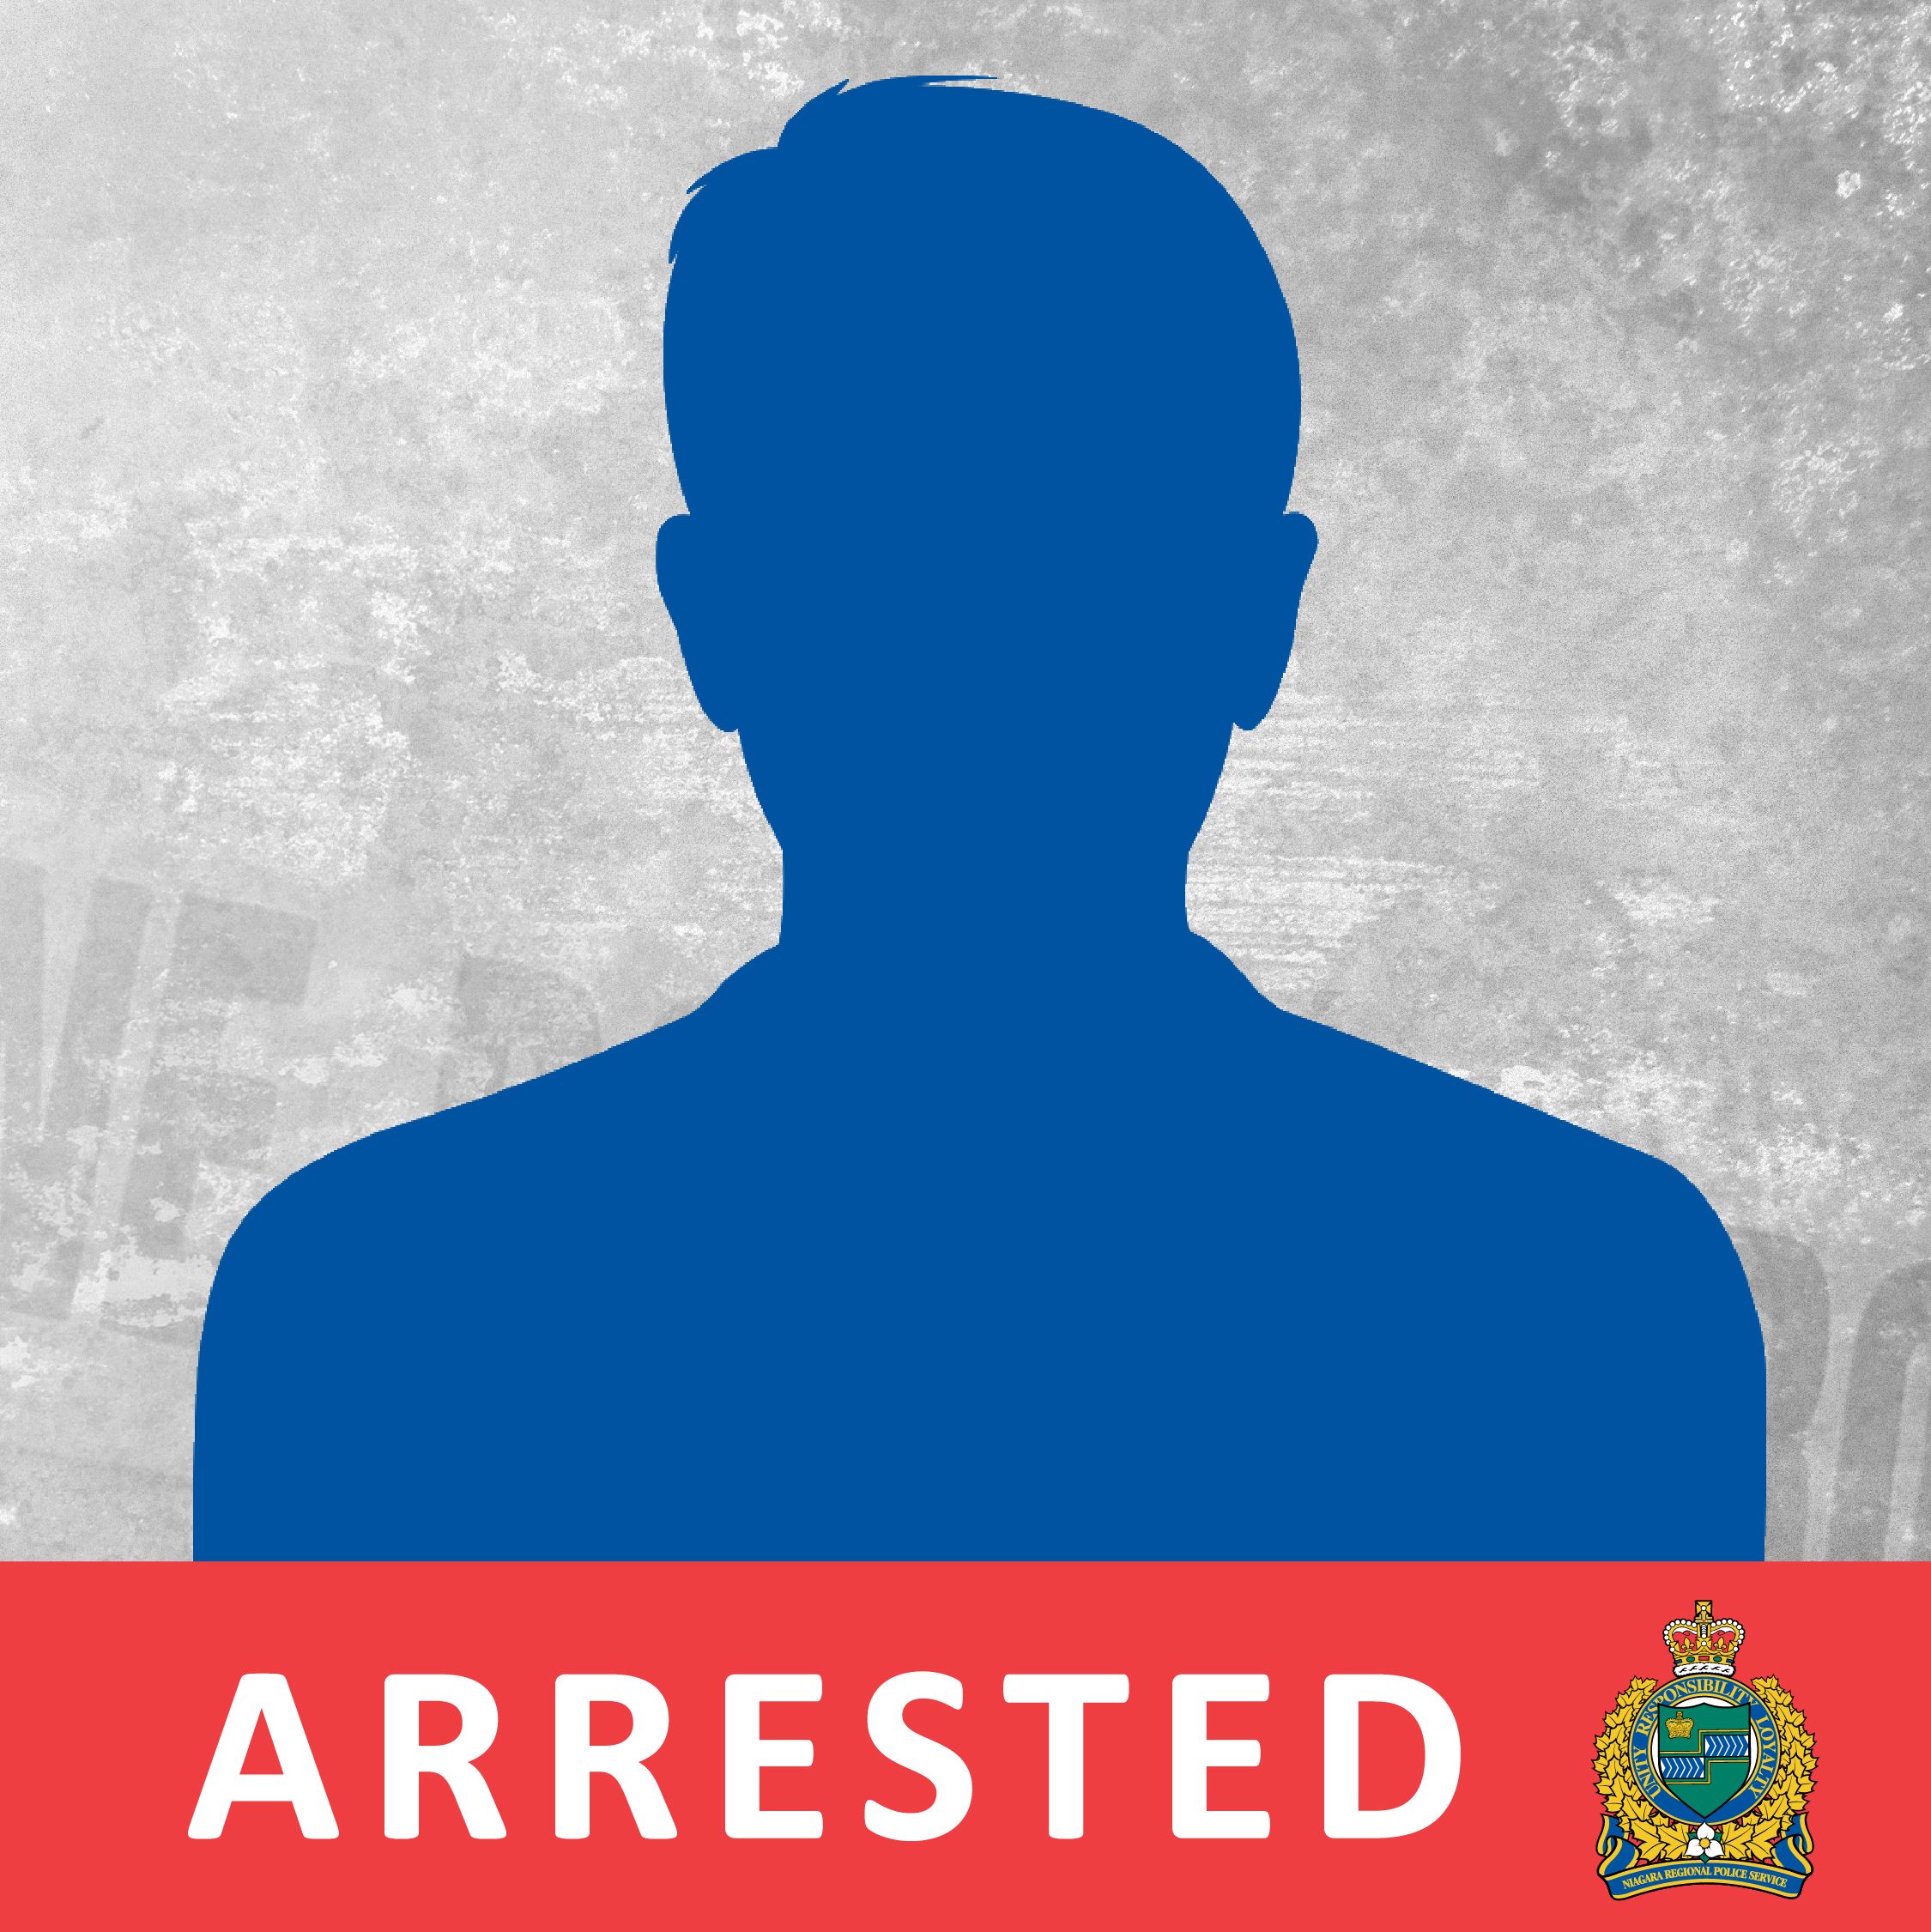 Male Arrested Silhouette